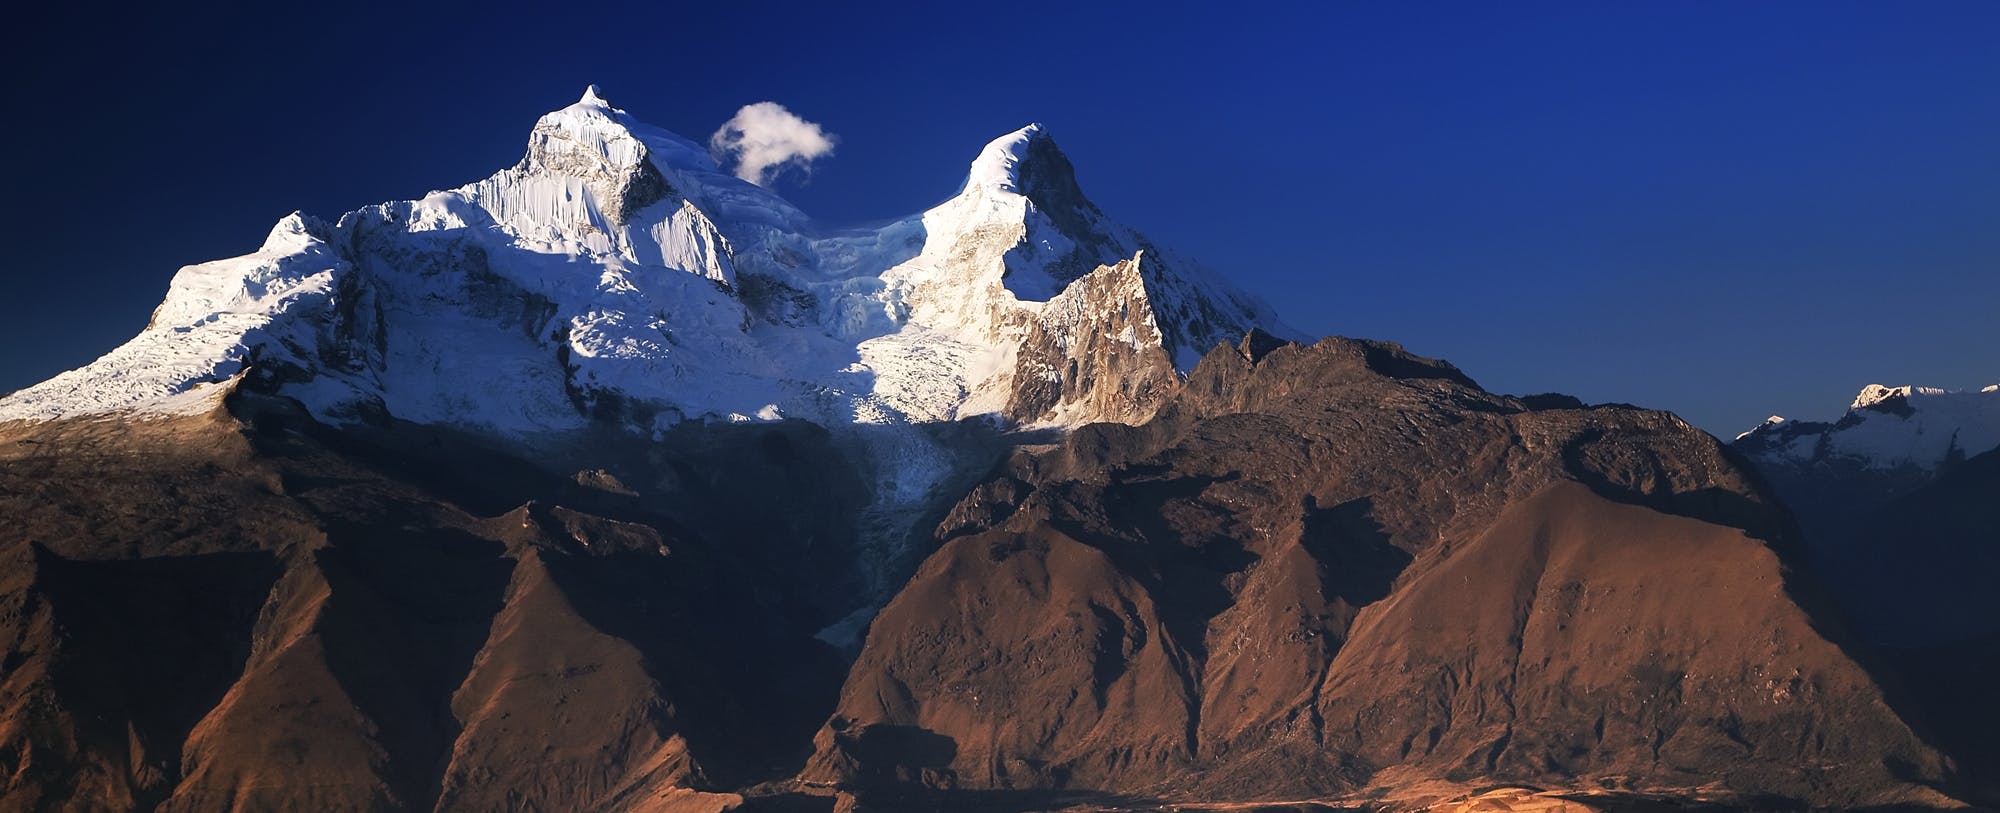 15 Stunning Peaks of The Andes